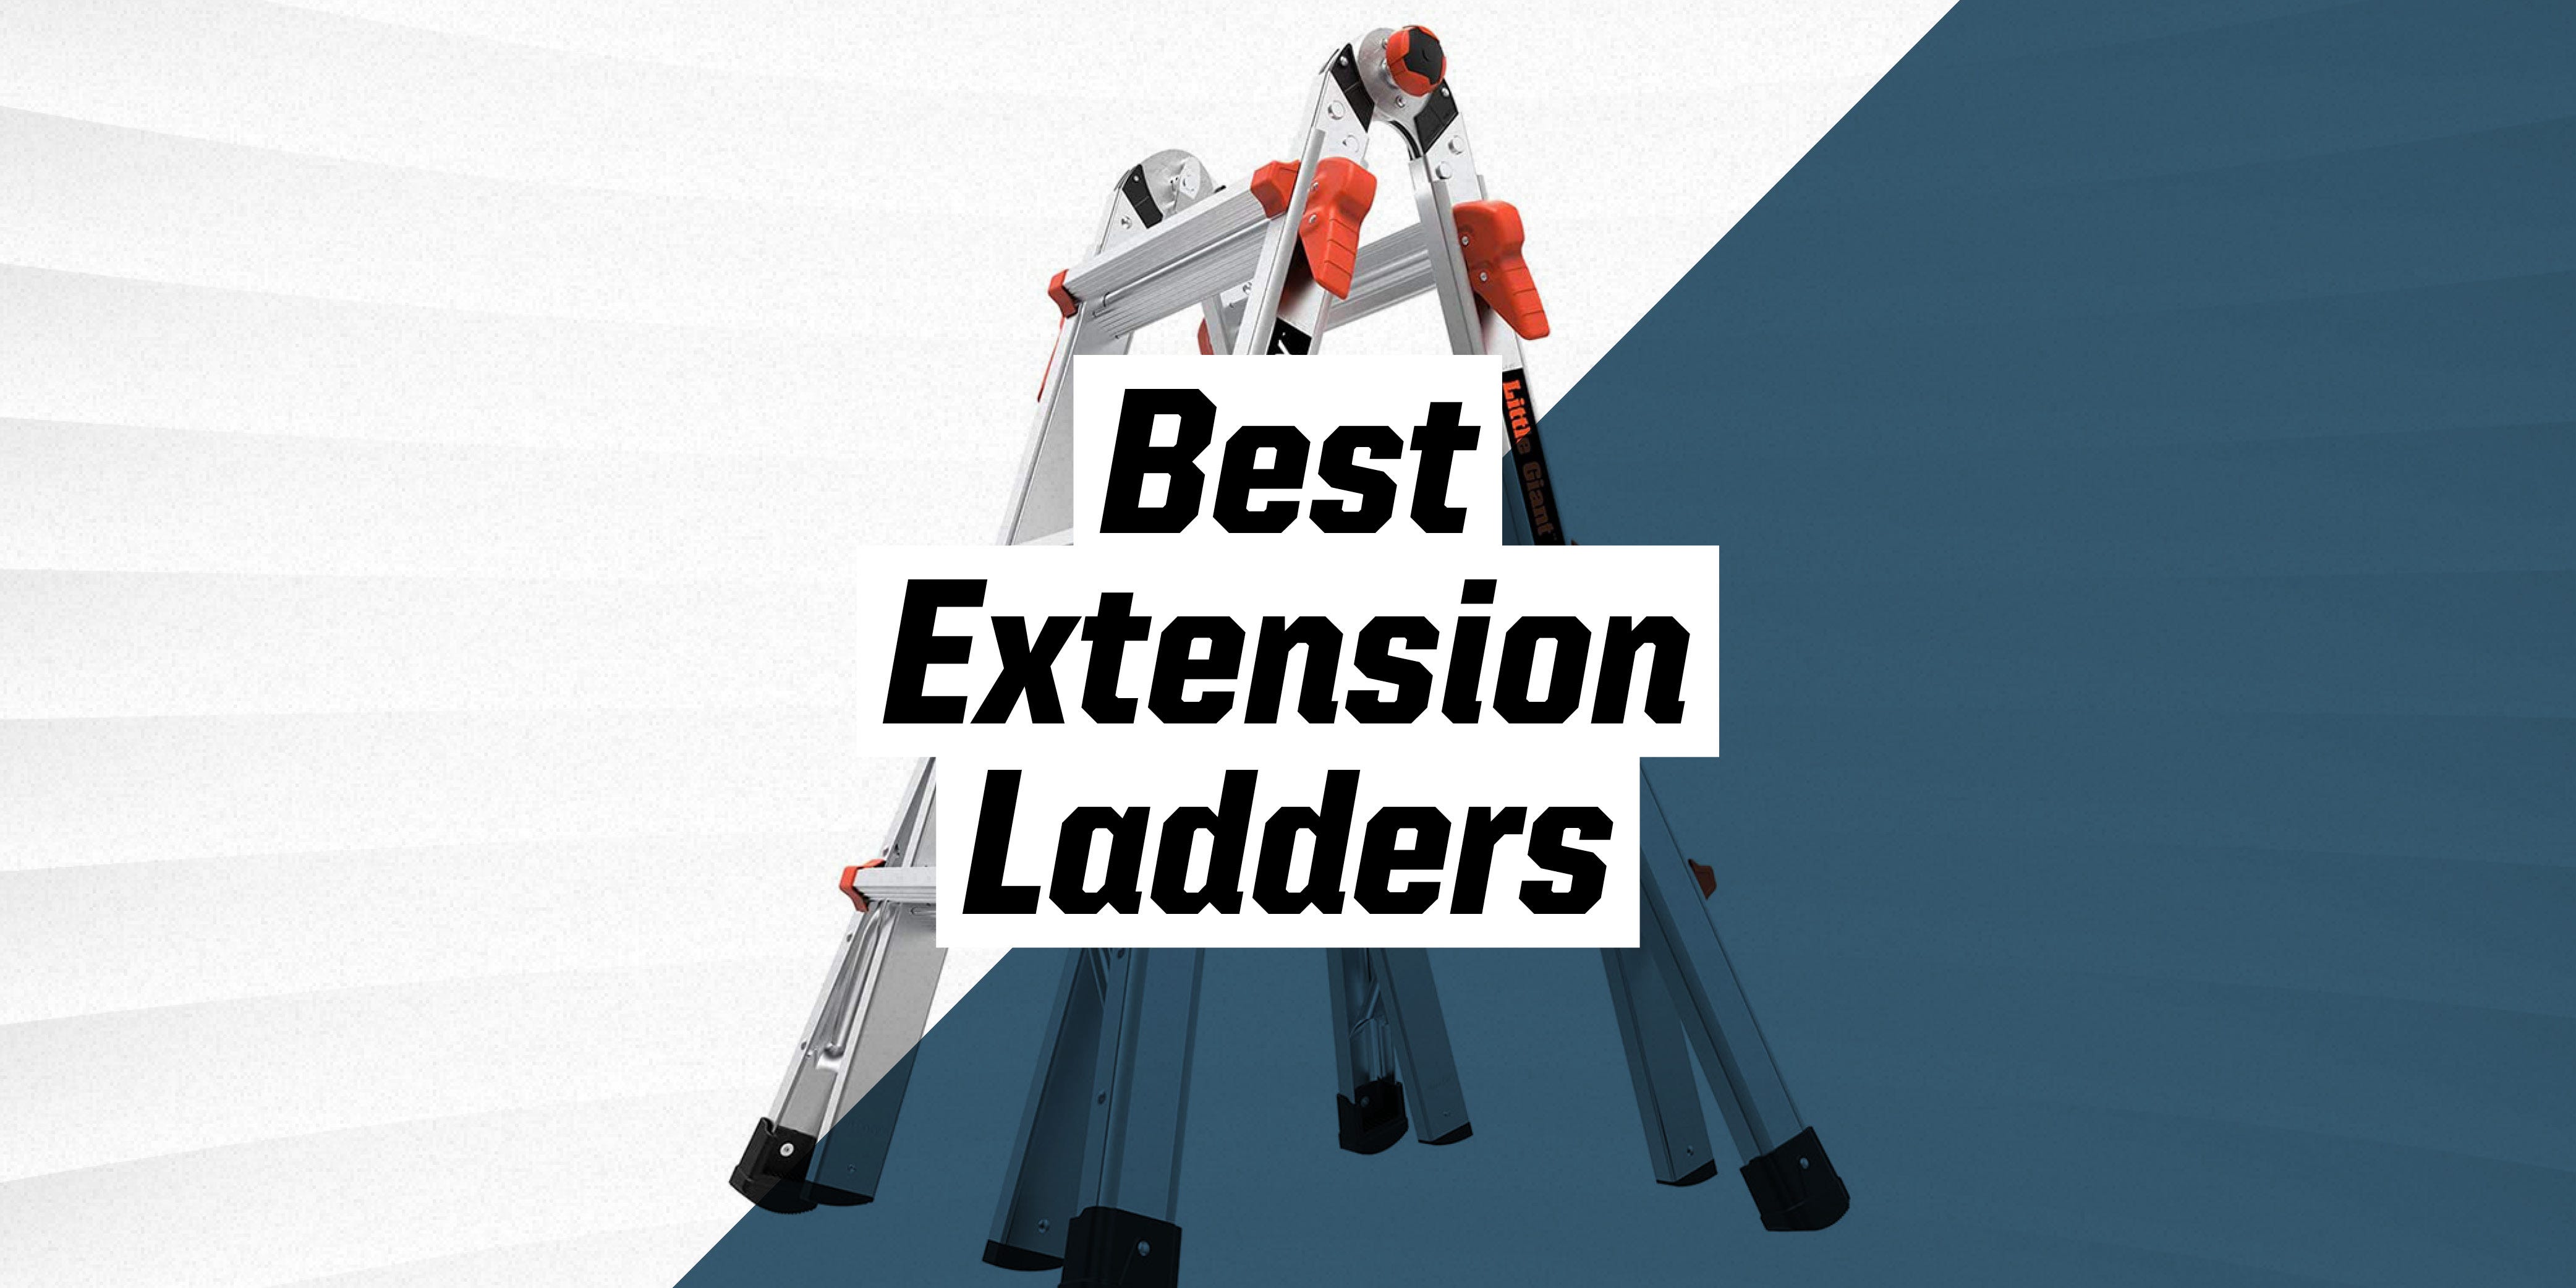 The Best Extension Ladders for Your High-Up DIY Tasks